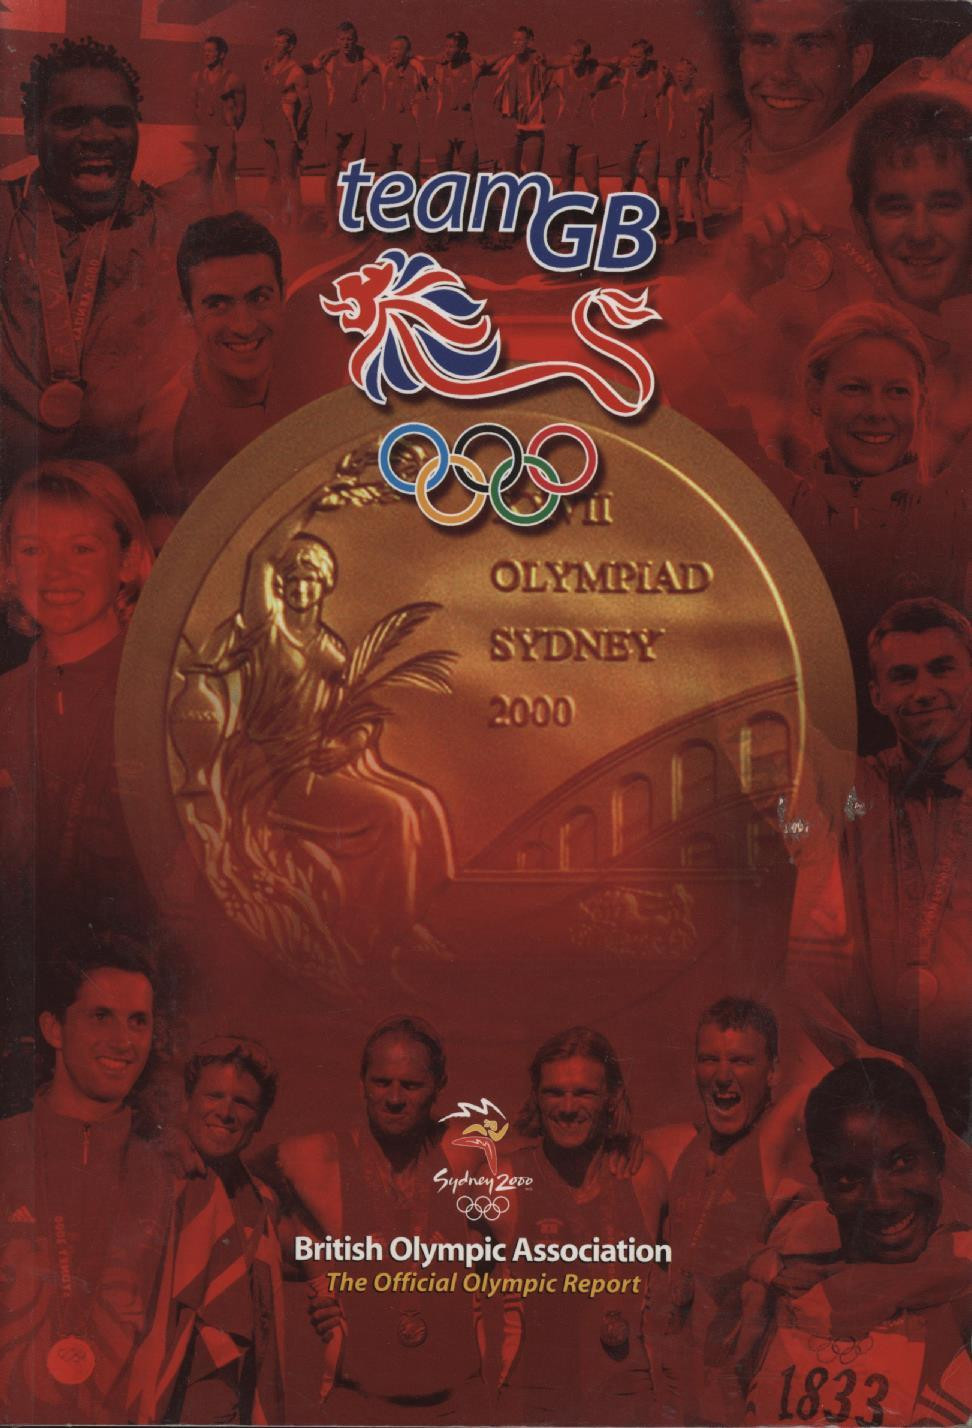 The Team GB brand was launched for the 2000 Olympic Games in Sydney ©Team GB